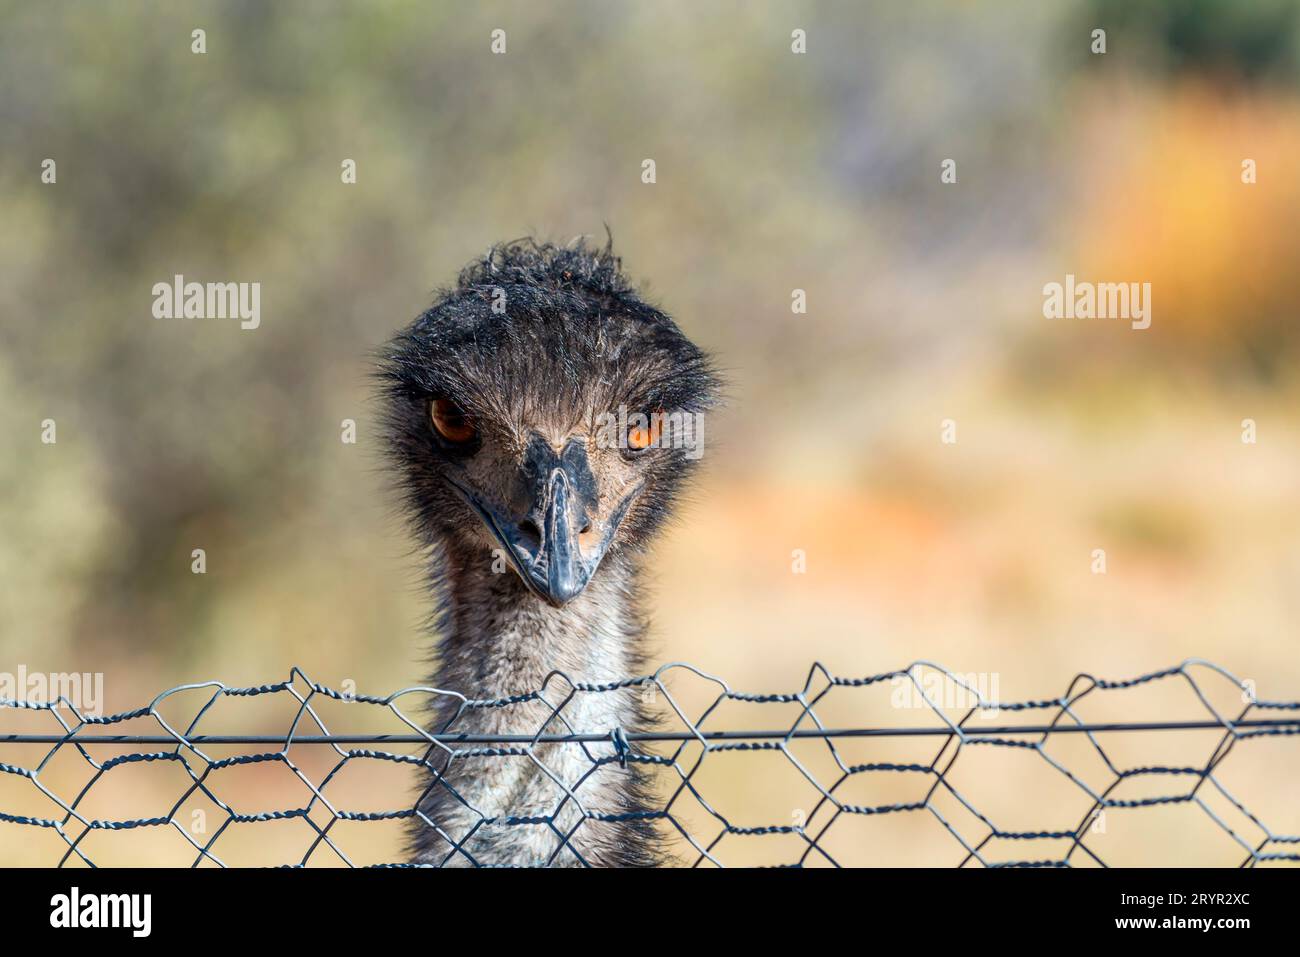 A closeup of an Australian Emu (Dromaius novaehollandiae) at the Alice Springs Desert Park in The Northern Territory, looking over a wire fence Stock Photo